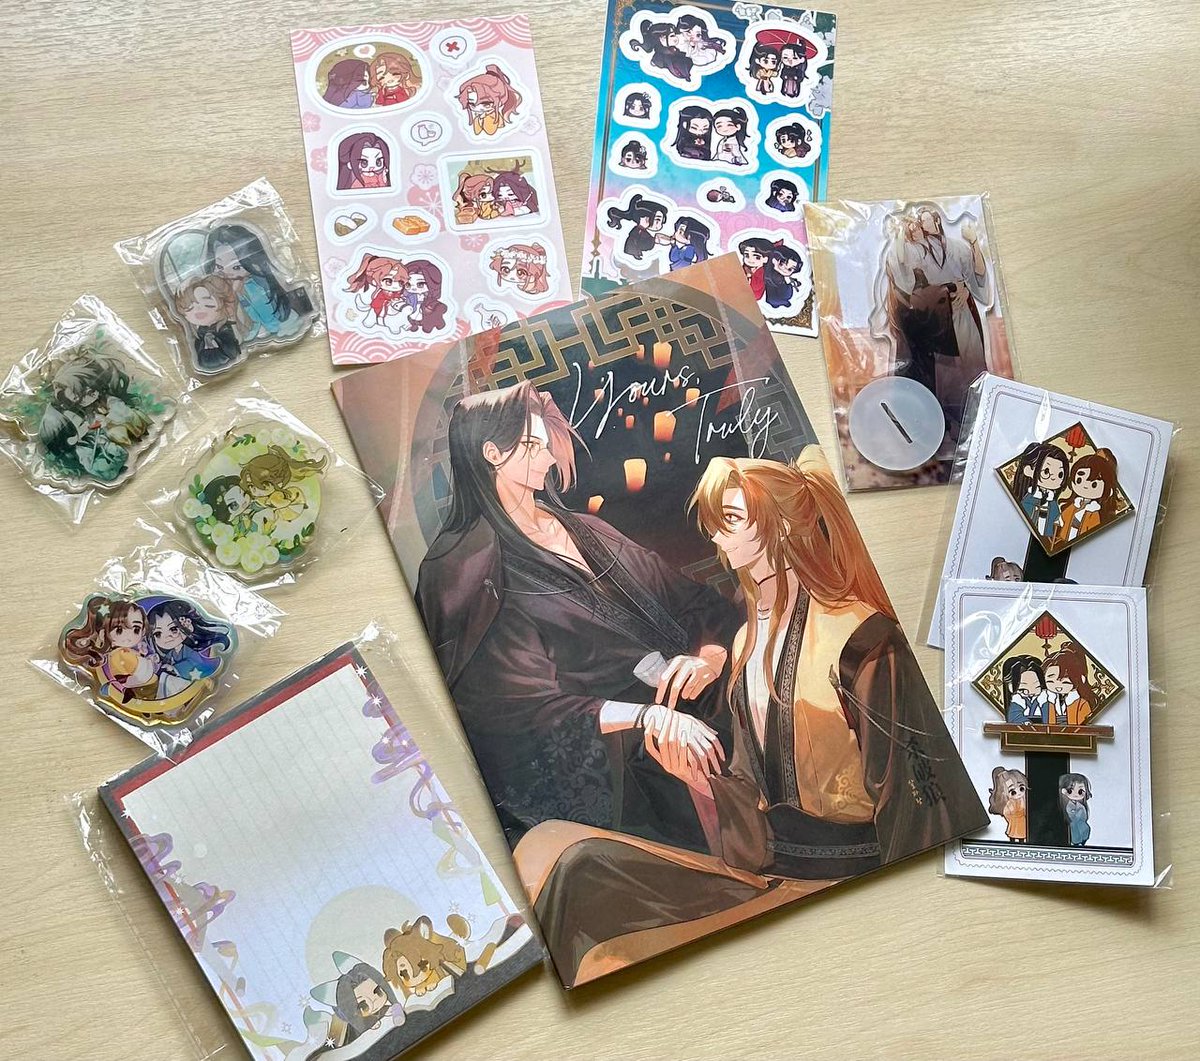 Thank you @changguzine for making this beautiful zine! So happy to be a part of this! I'm in love with everything and miss SPL so much🥺💕💕